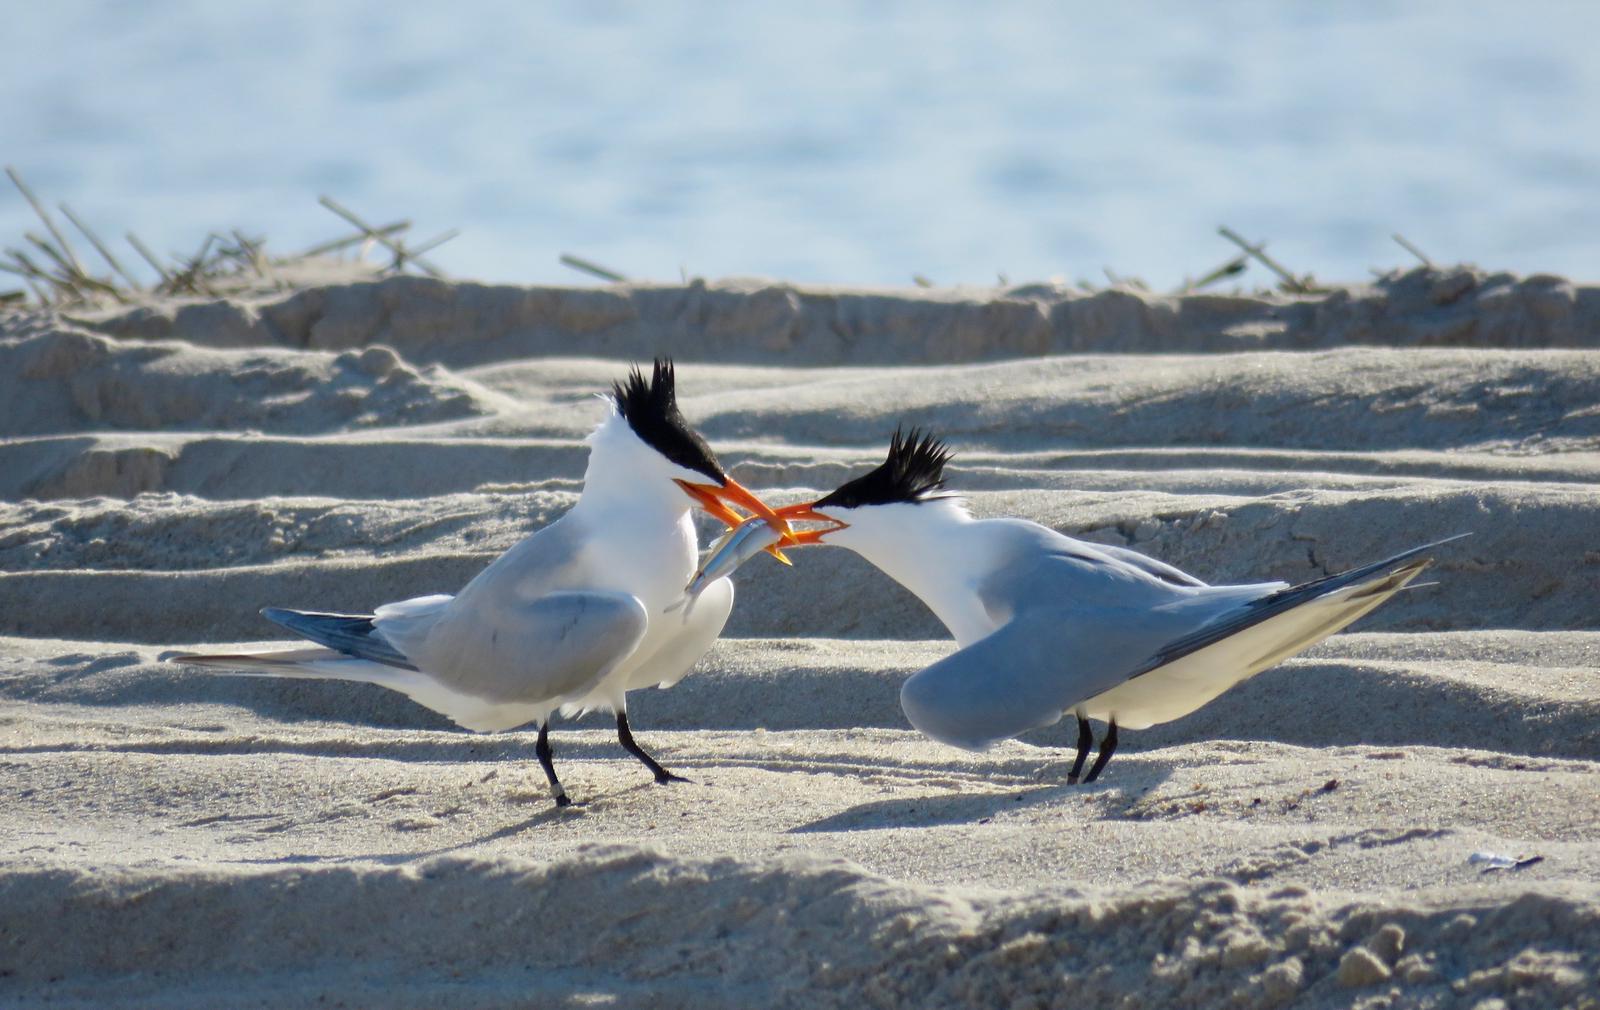 Royal Terns tussle over a tasty fish.